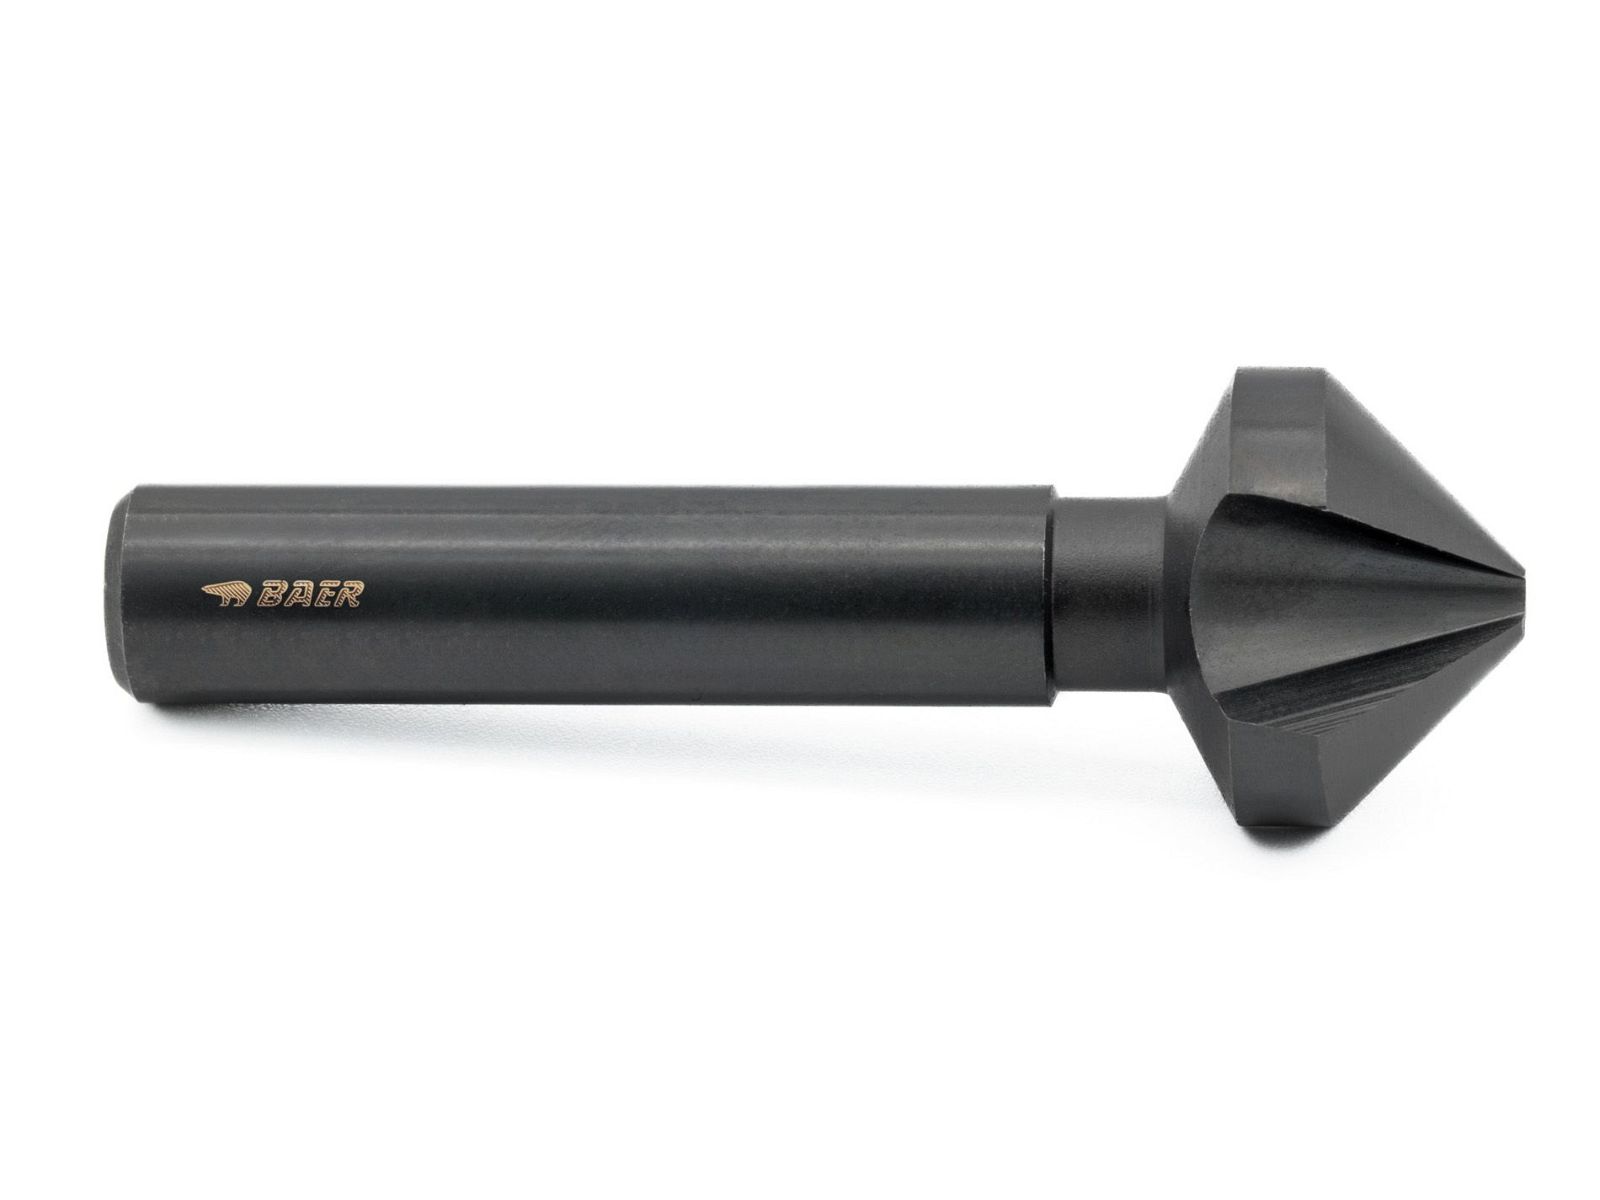 HSSE-VAP 90° Countersink 6.3 mm (for M 3) - for Stainless Steels